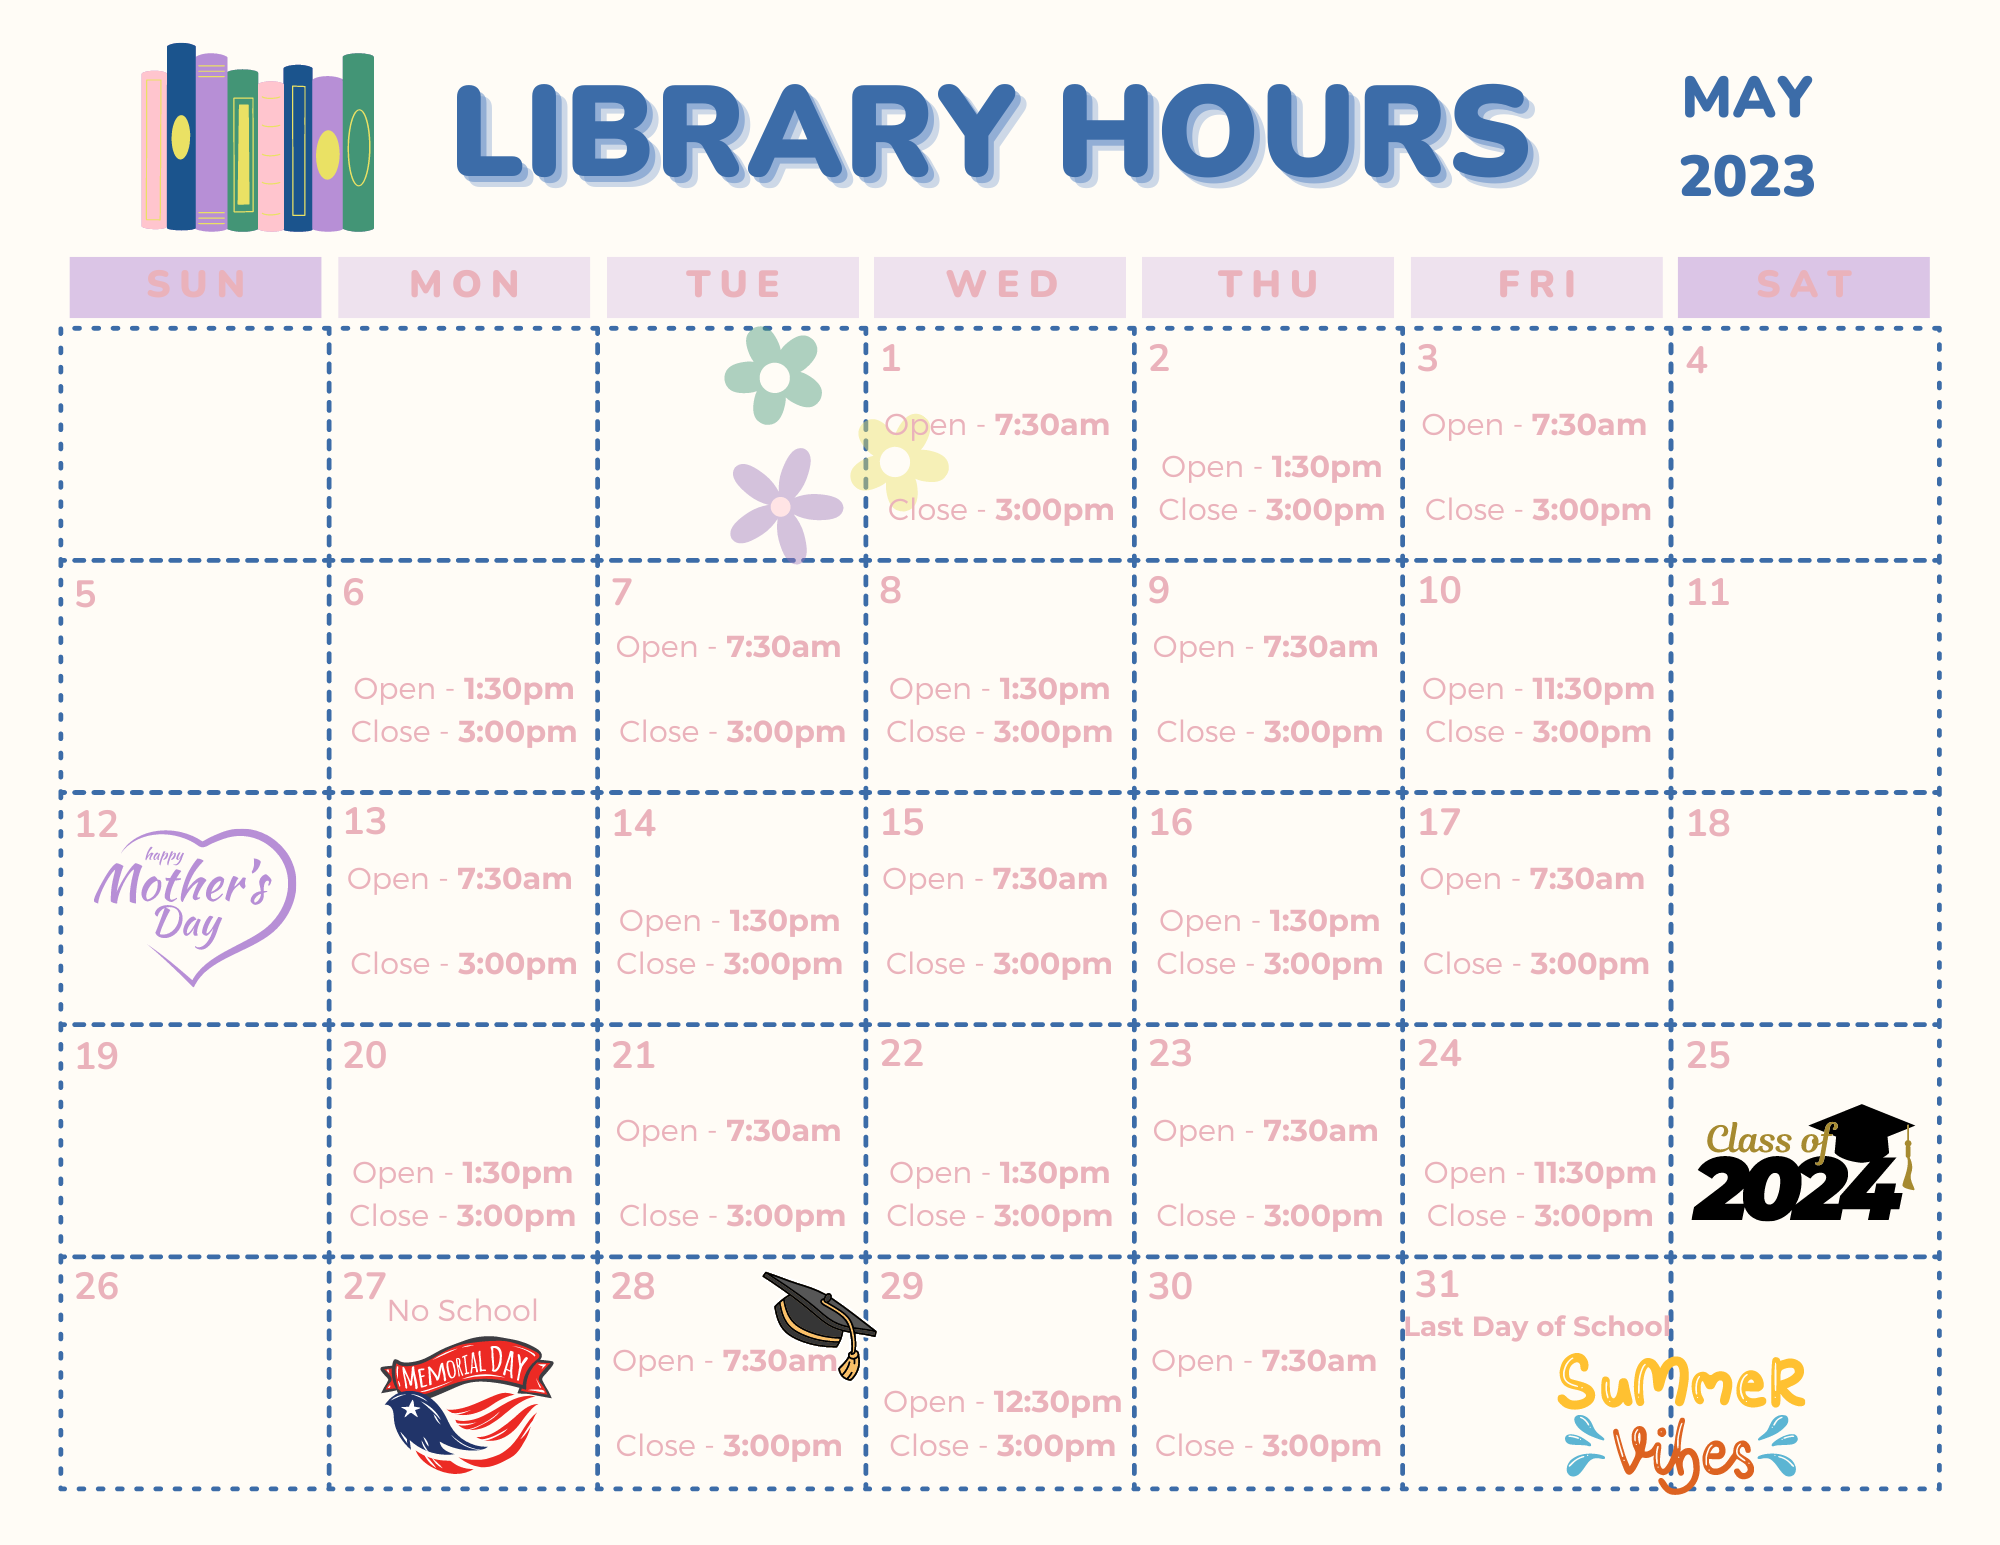 Library hours